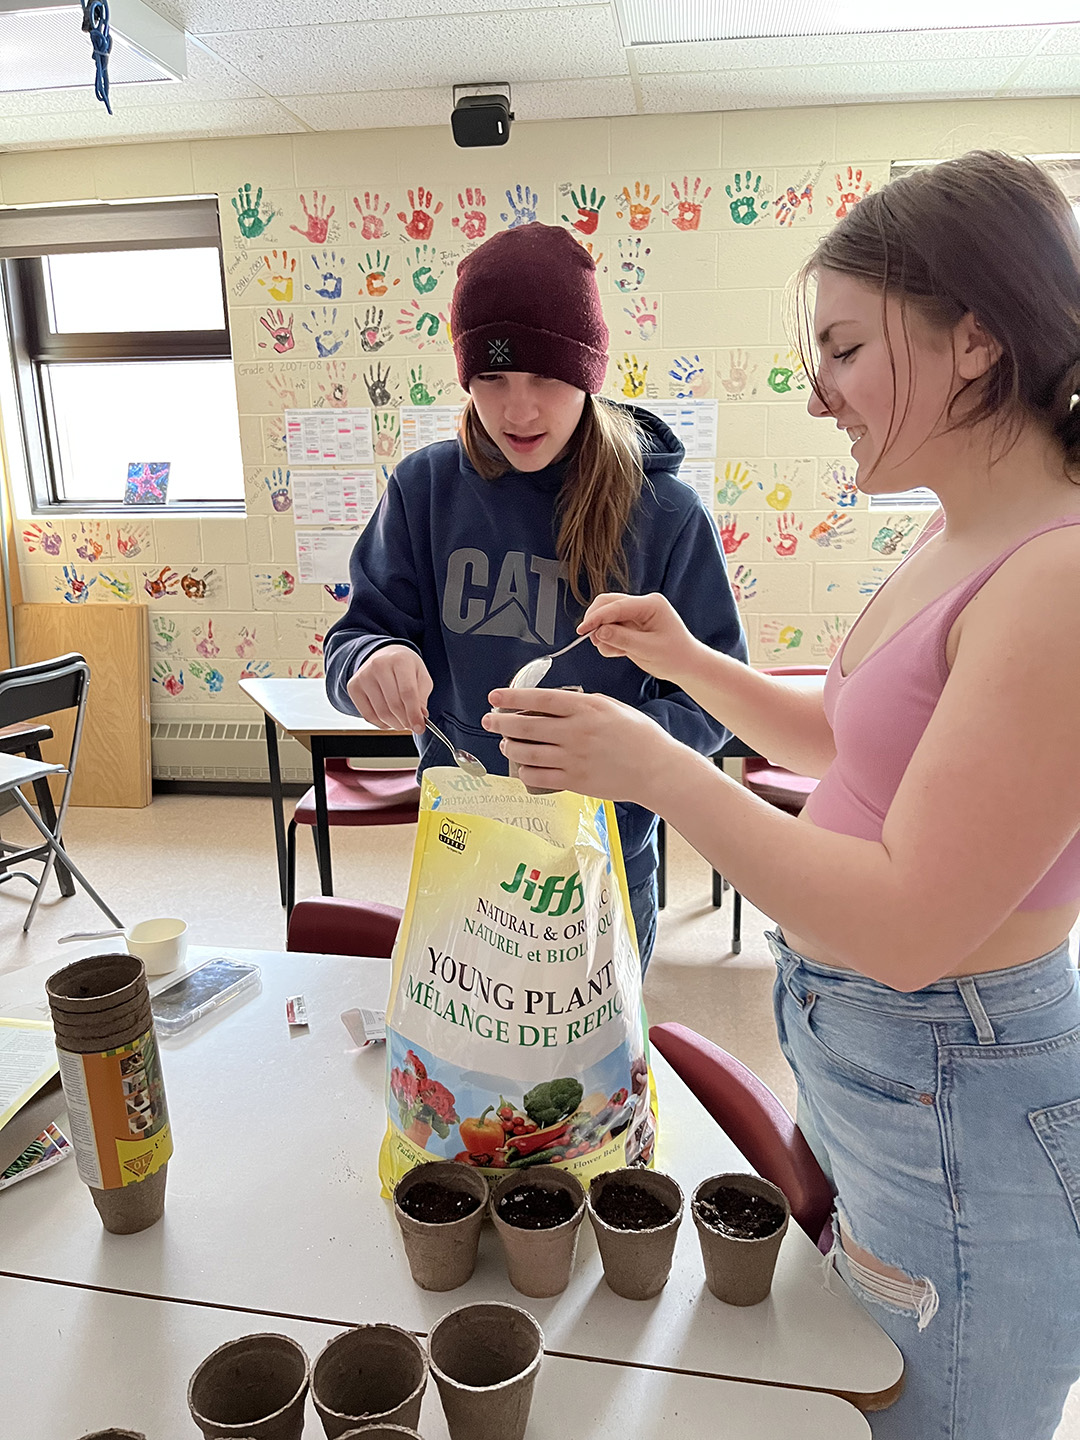 Cambridge-Narrows Community School students in the Climate Action Group grow plants as part of ongoing sustainability initiatives at the school.